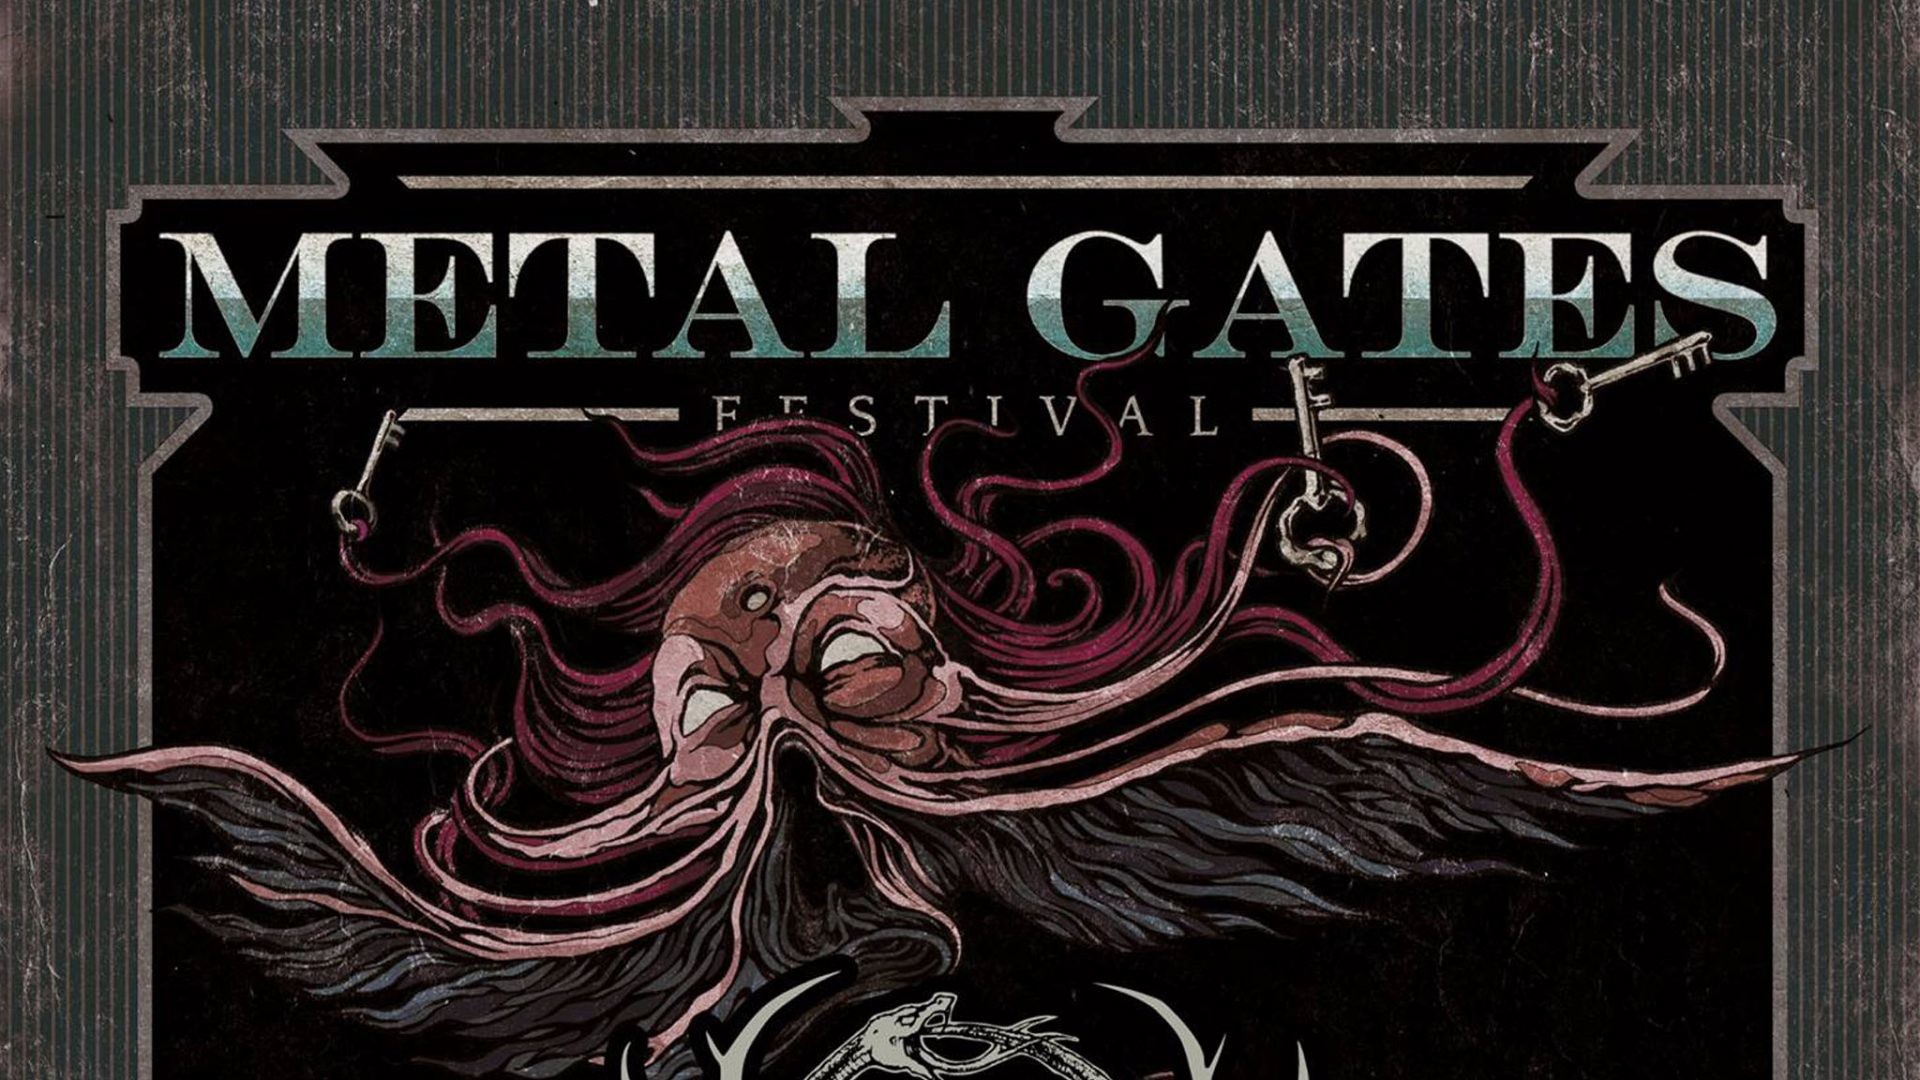 1920x1080 Metal Gates Festival – final poster and line-up by days